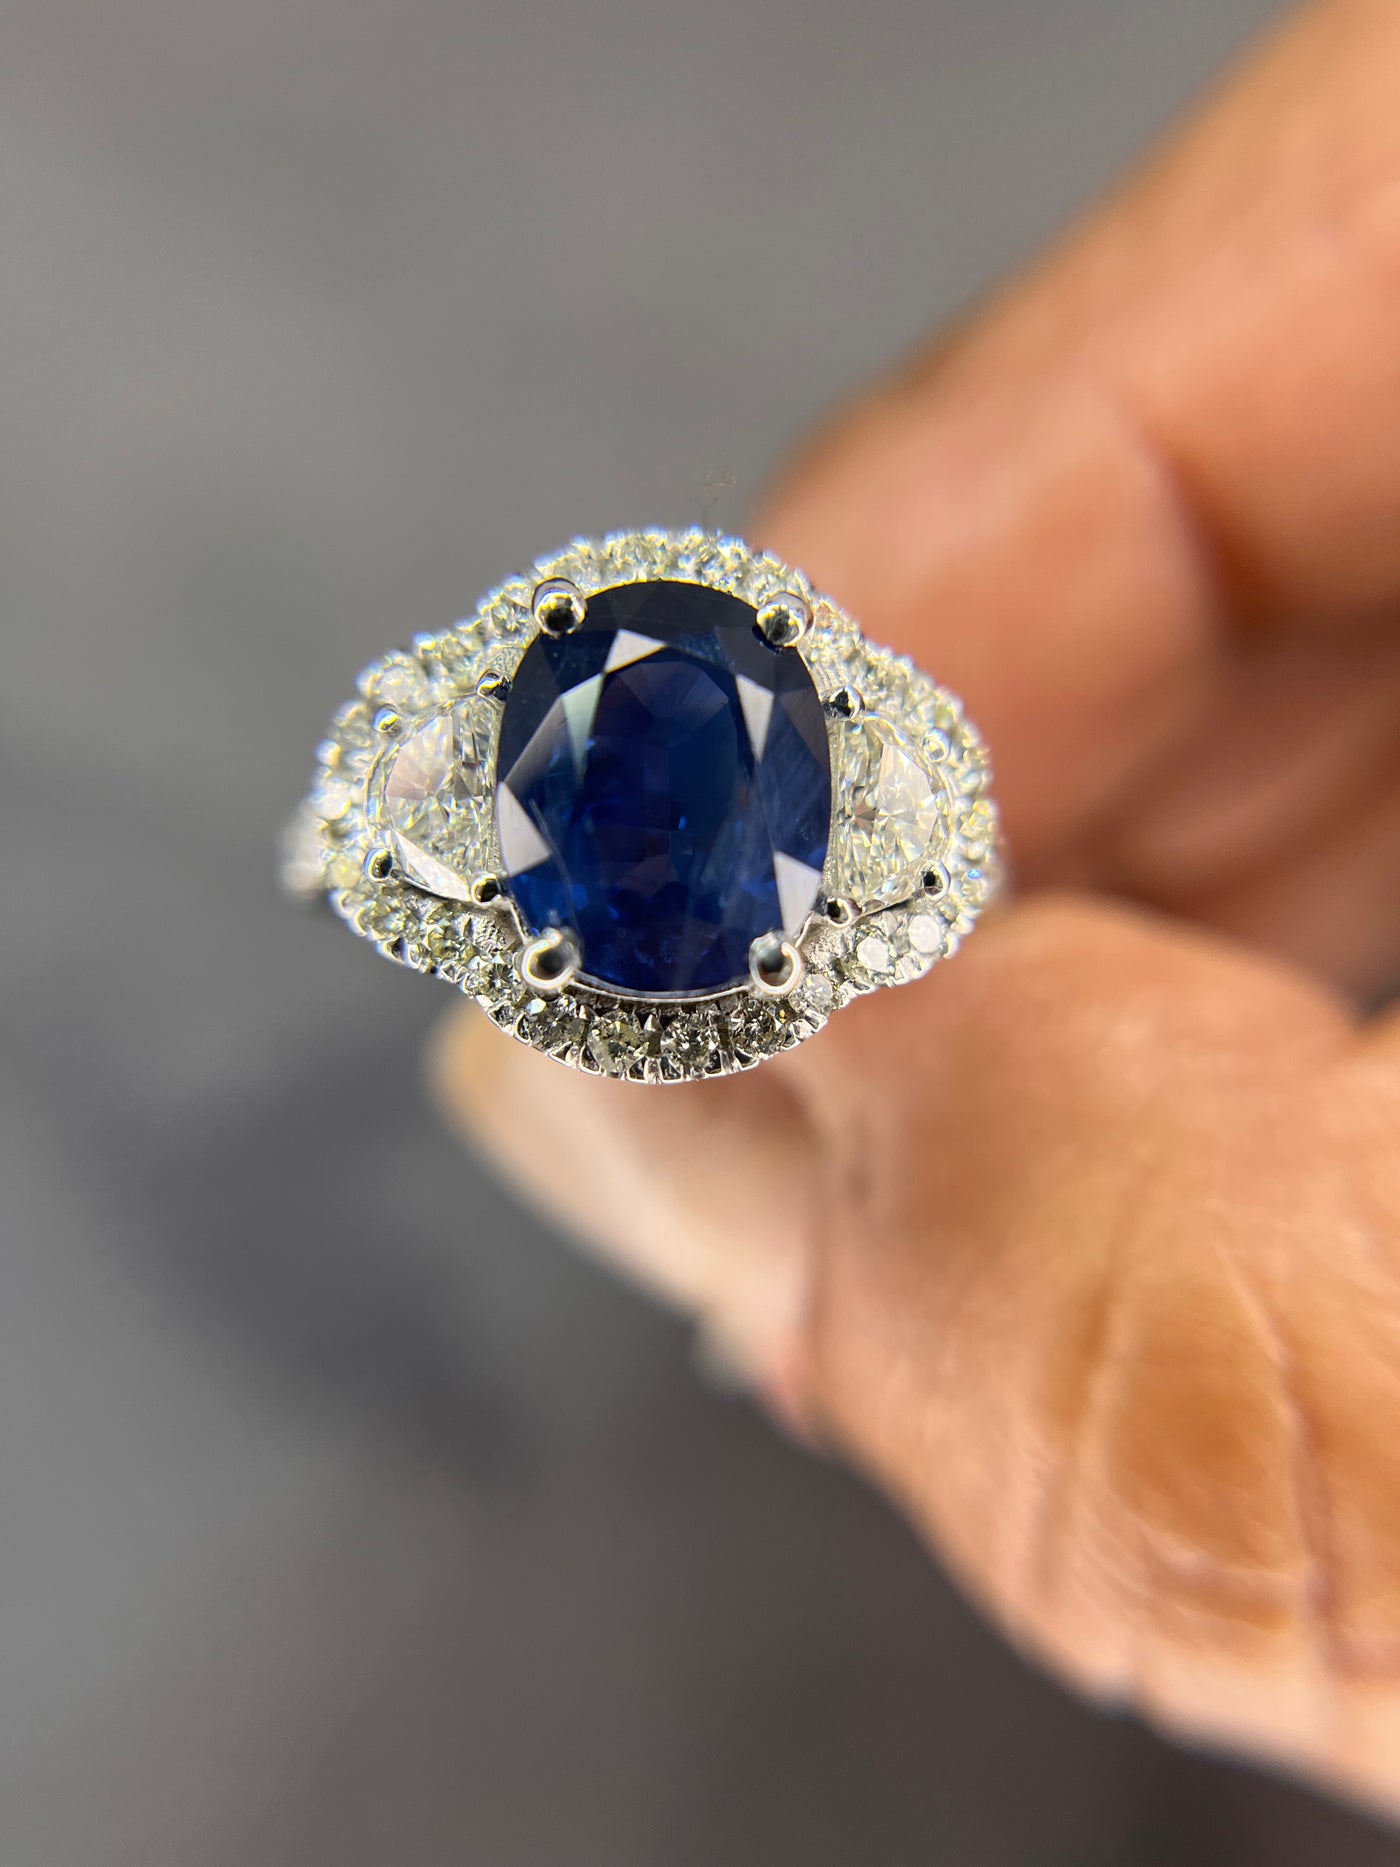 Halo Design 2 Ct. Tw. Oval Cut Natural Blue Sapphire with 1.25 Ct. Tw. Half Moon and Round Cut Side Diamond Ring